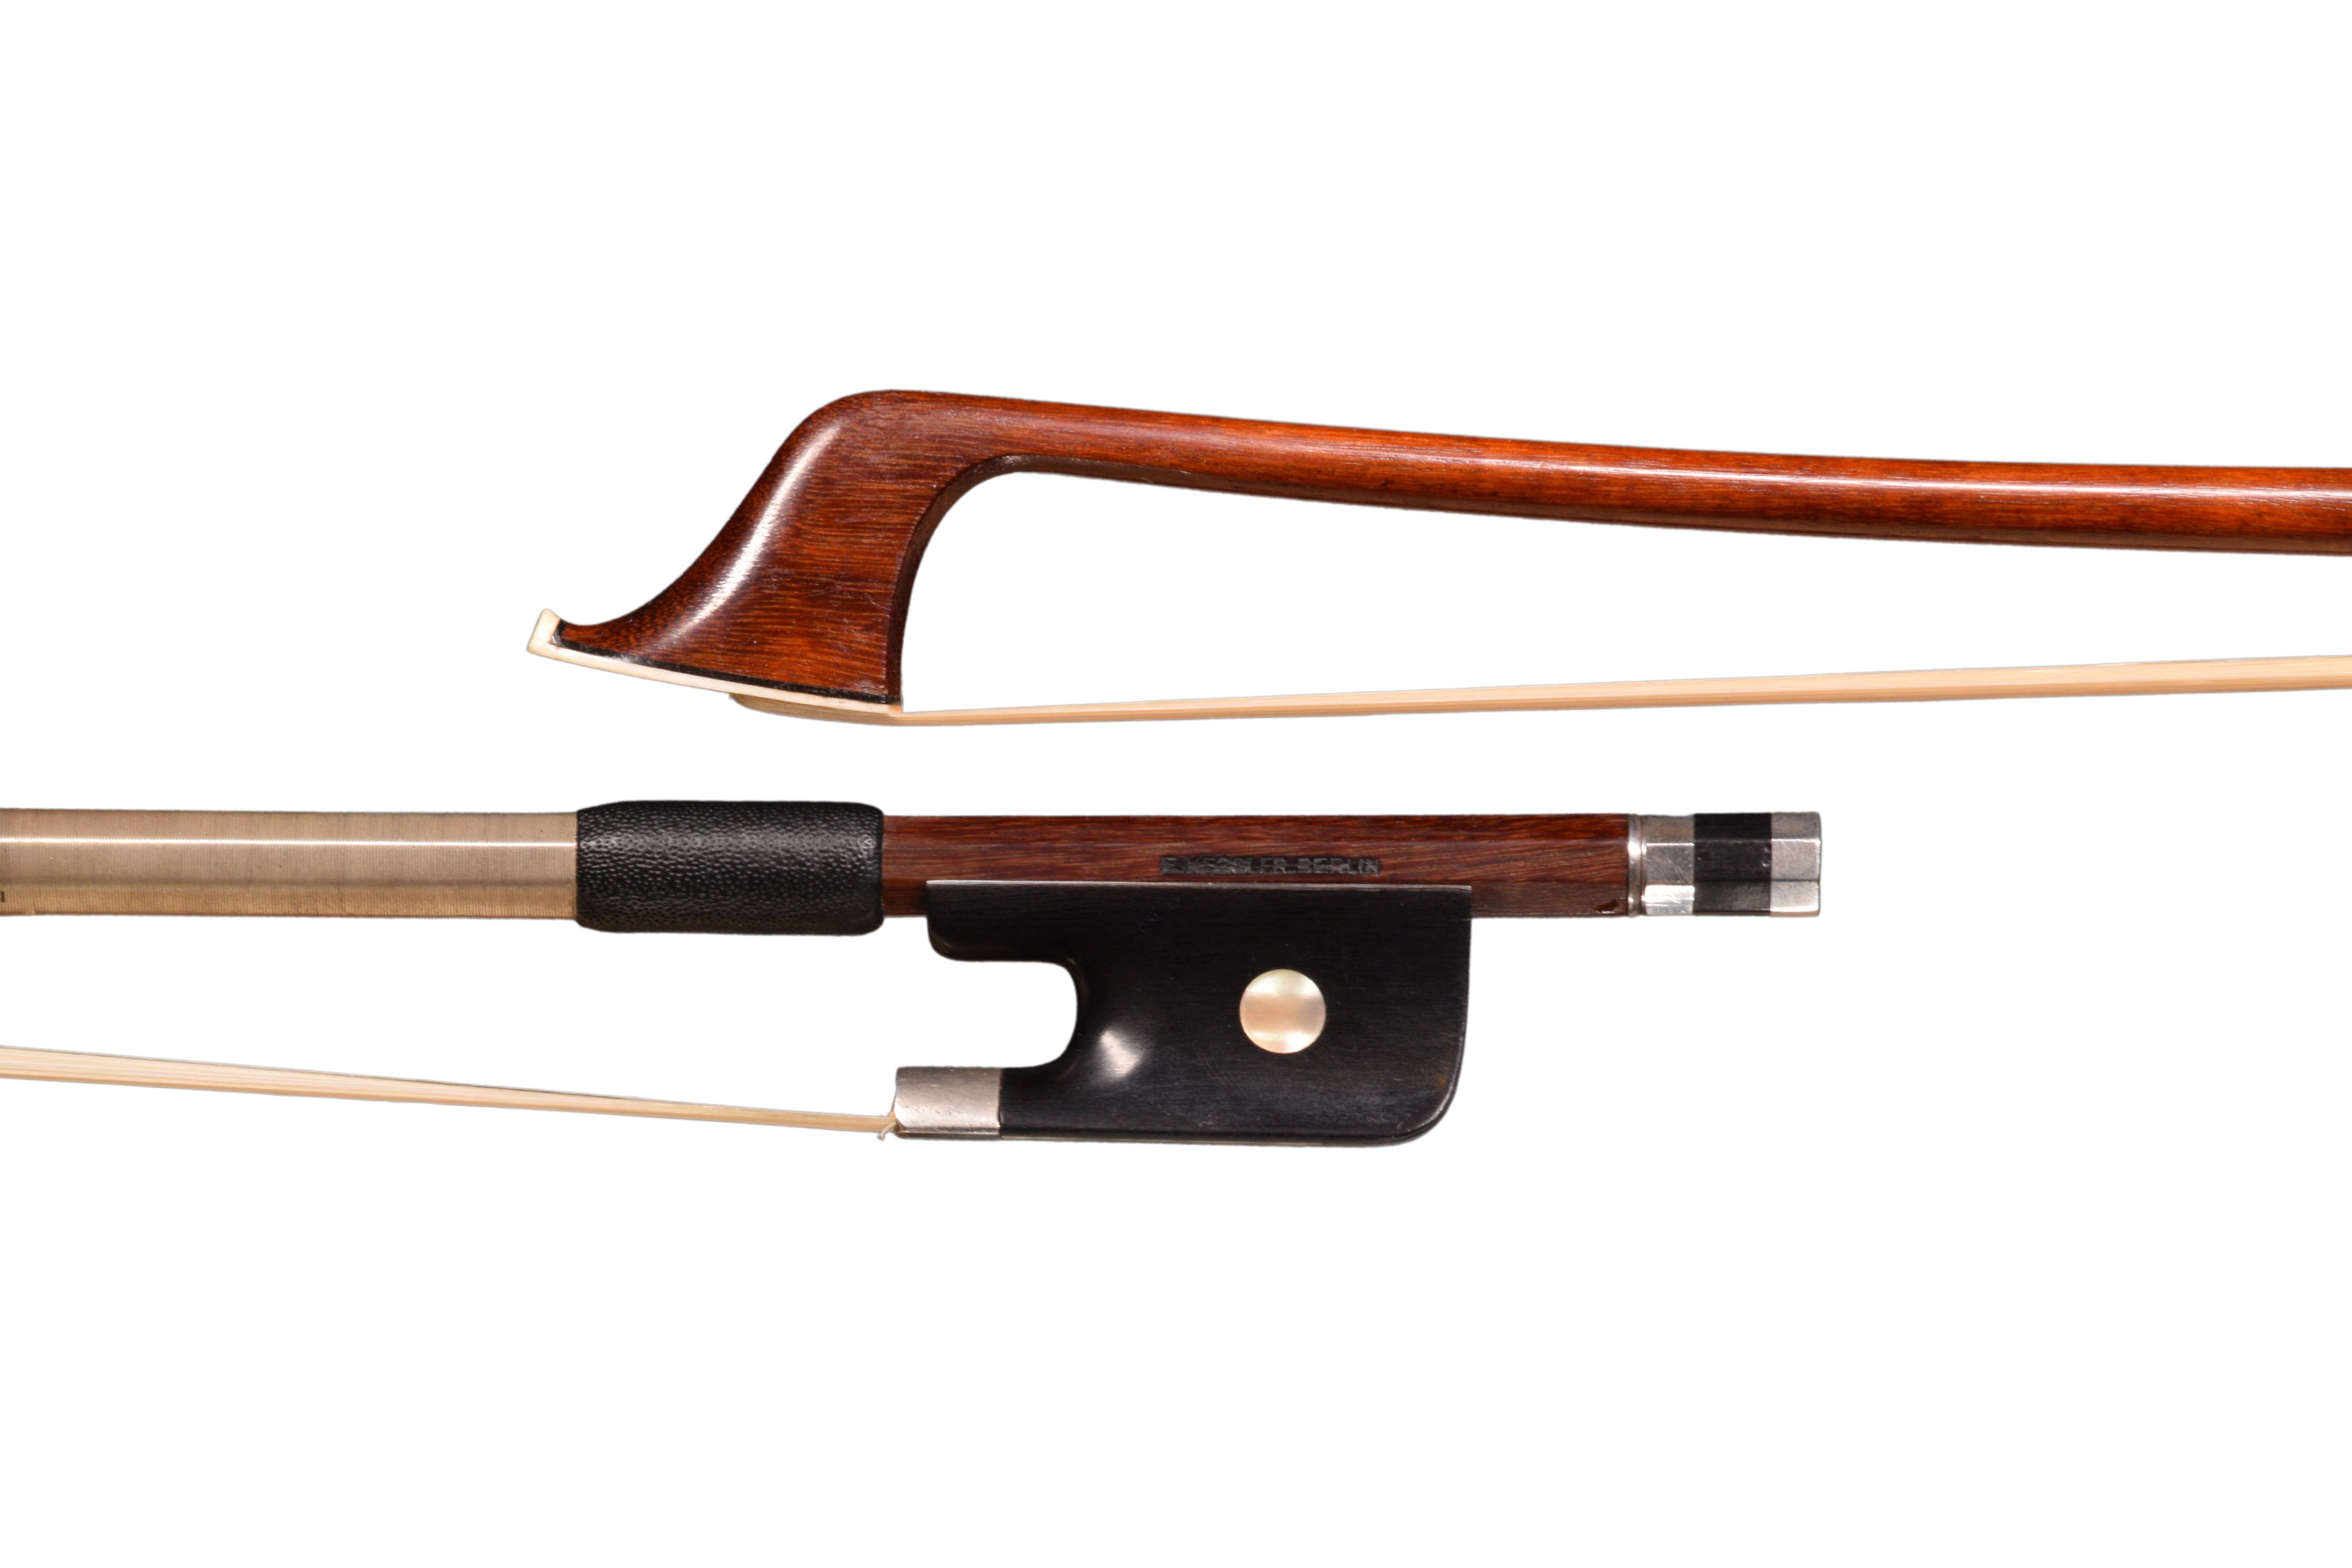 Kessler cello bow frog and head